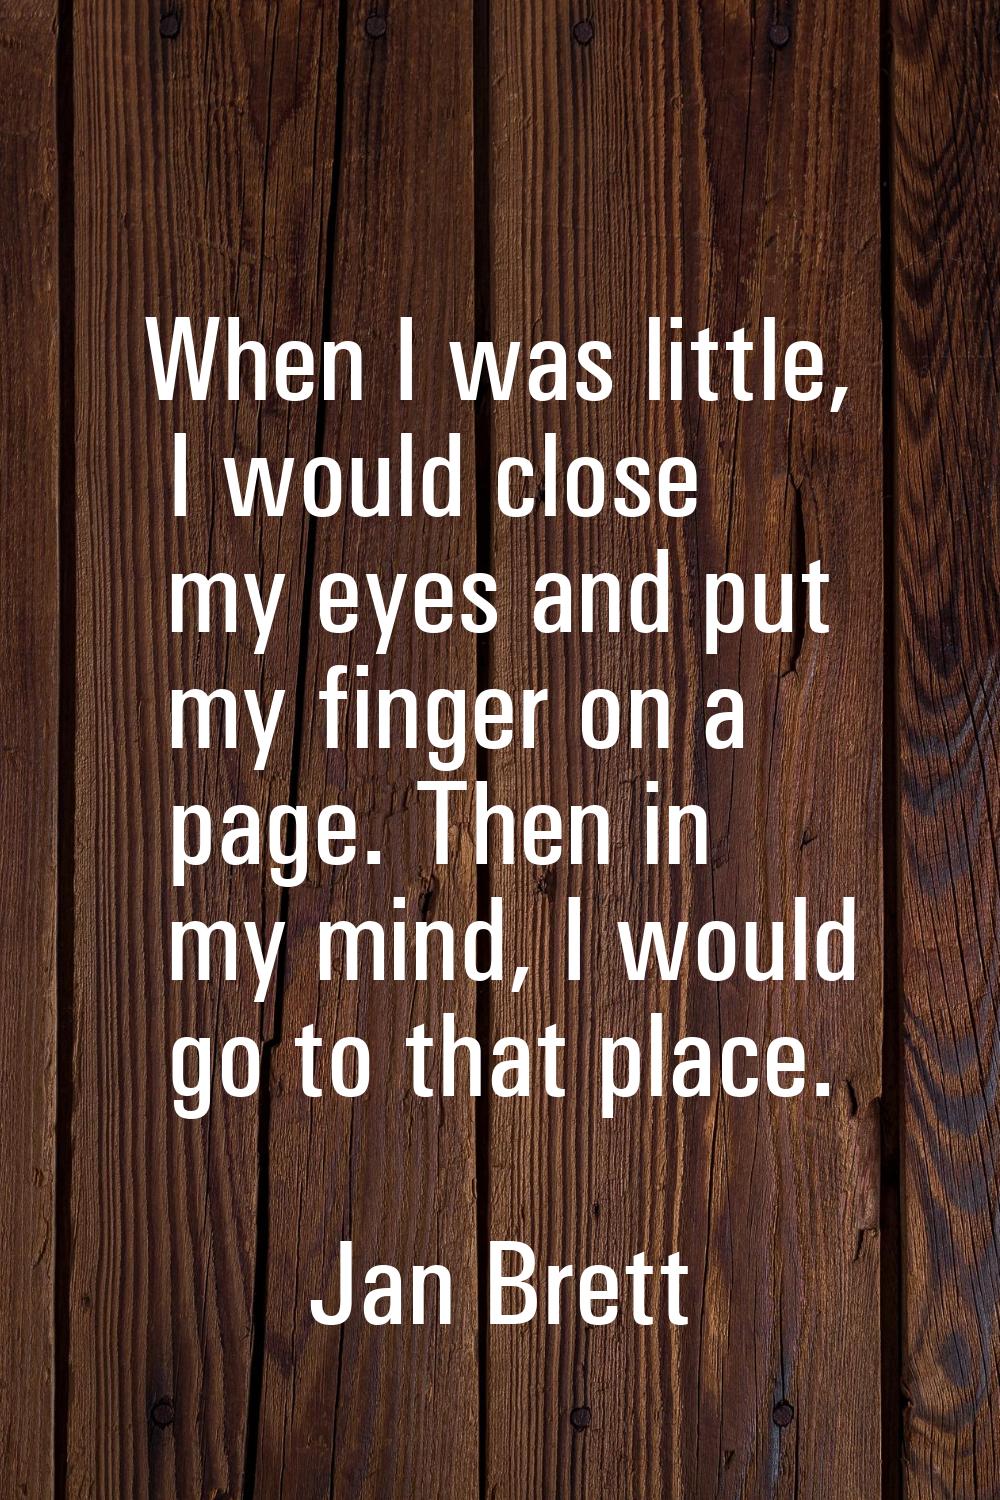 When I was little, I would close my eyes and put my finger on a page. Then in my mind, I would go t